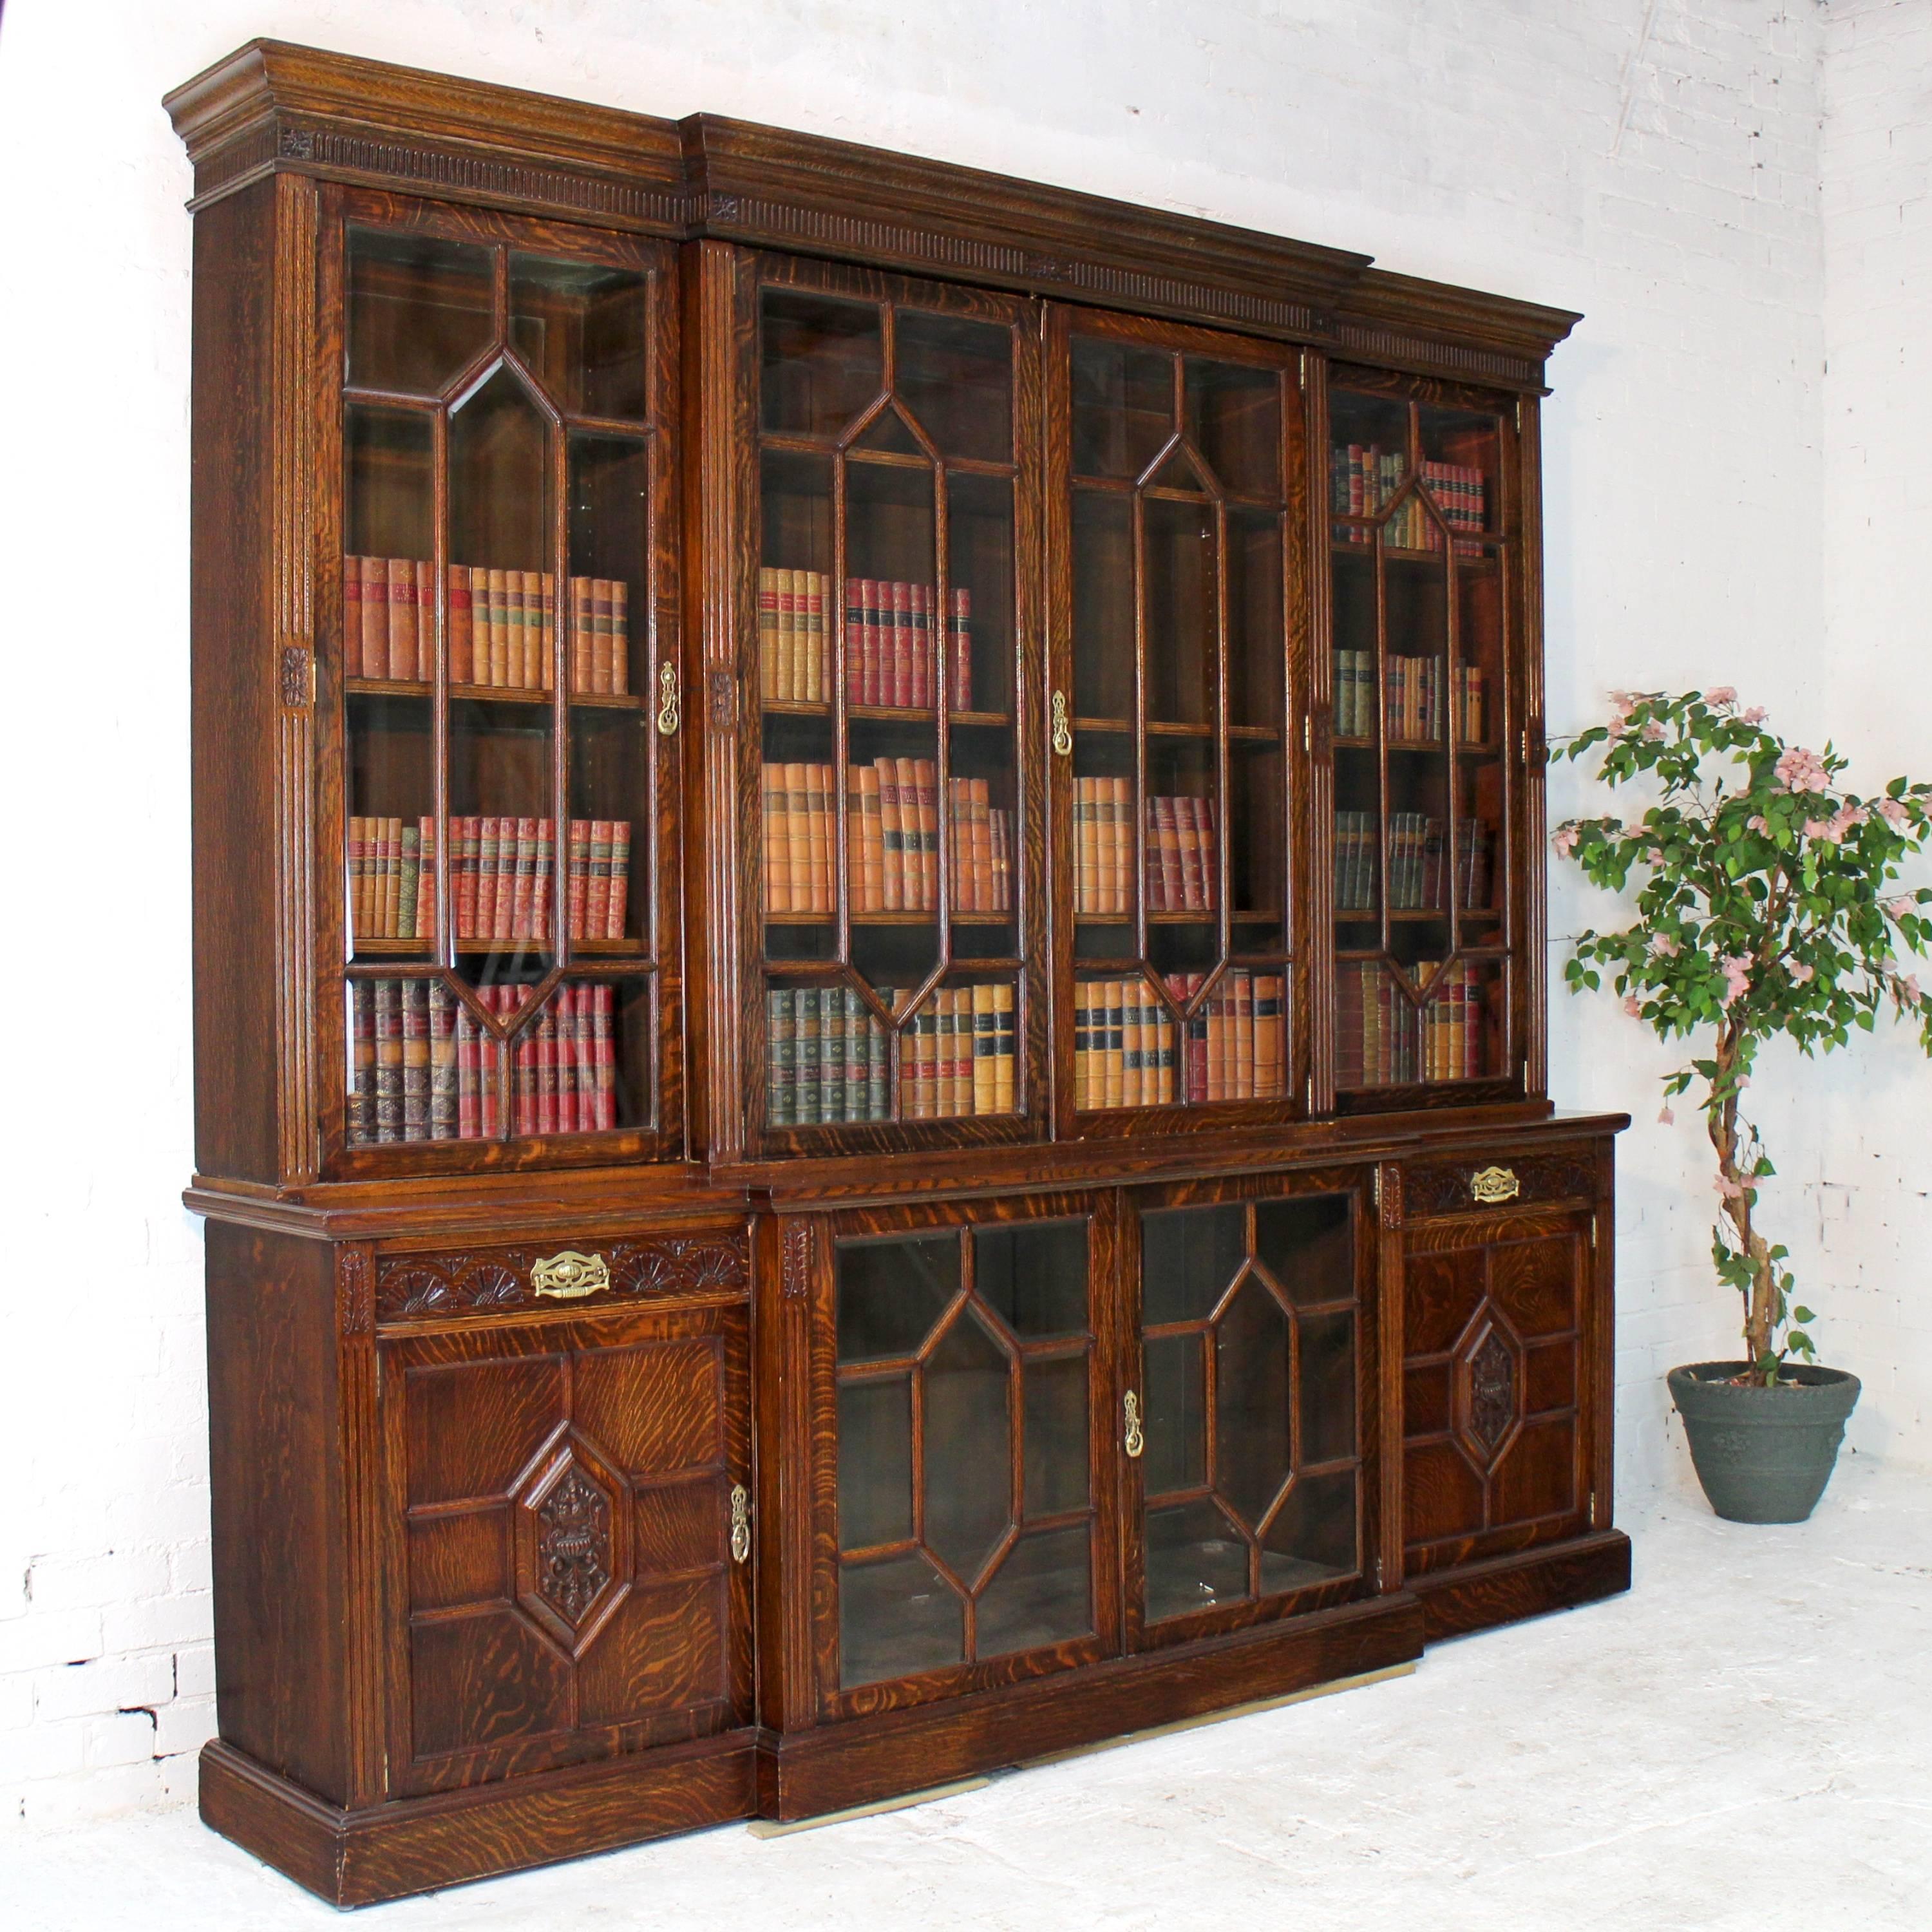 A stunning Victorian four-door breakfront bookcase by Maple & Co in the Aesthetic/Arts & Crafts style and dating to circa 1889. In quarter sawn oak with bevelled glass panes to the astragal glazed doors it features foliate carved emblems and fluting